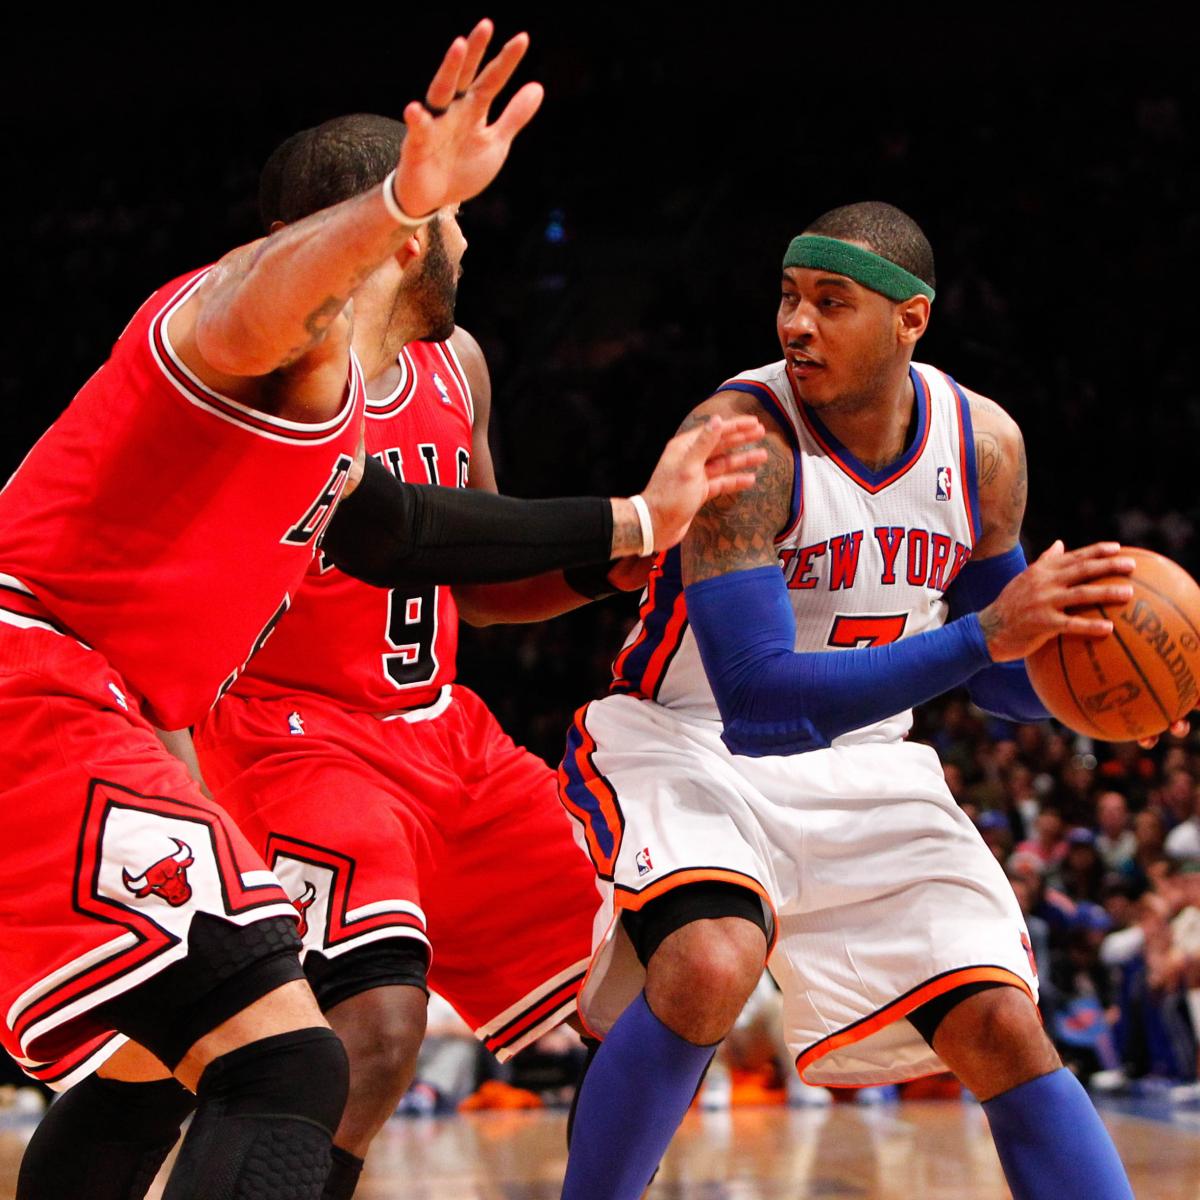 Chicago Bulls vs. New York Knicks Preview, Analysis, and Predictions